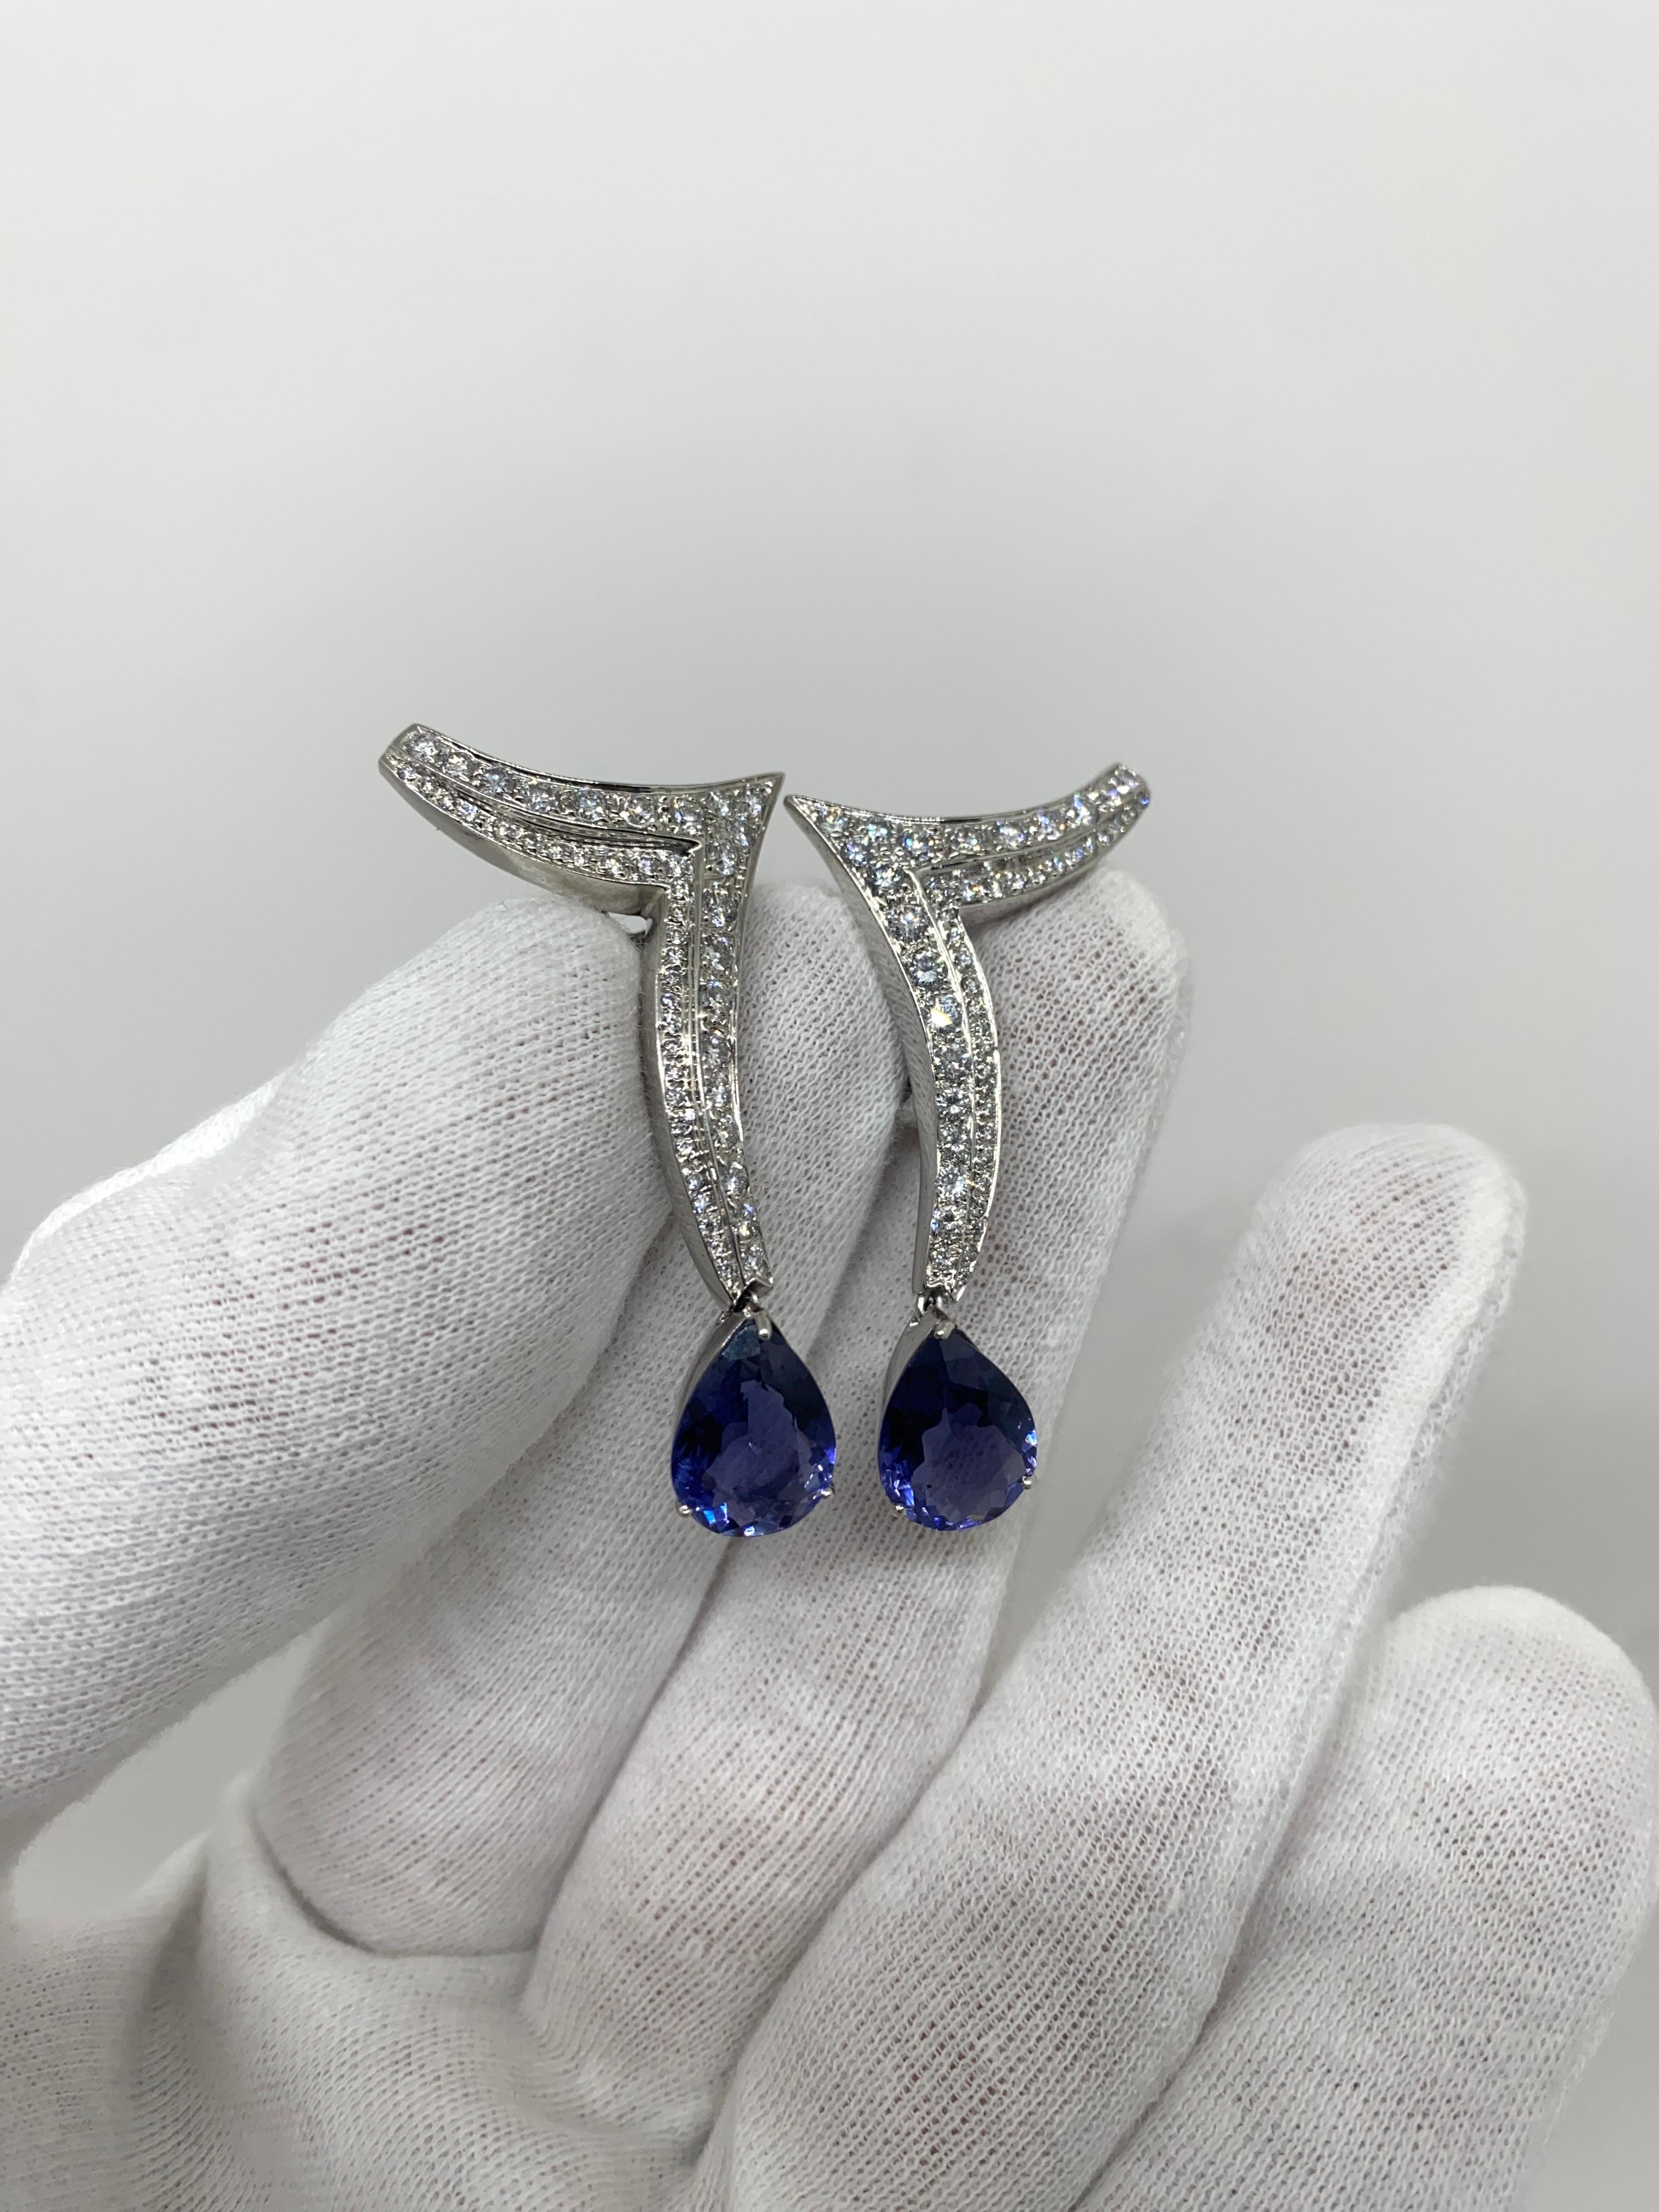 Dangling earrings made of 18kt white gold with natural drop-cut iolites for ct.5.20 and pavé natural white brilliant-cut diamonds for ct.1.90

Welcome to our jewelry collection, where every piece tells a story of timeless elegance and unparalleled